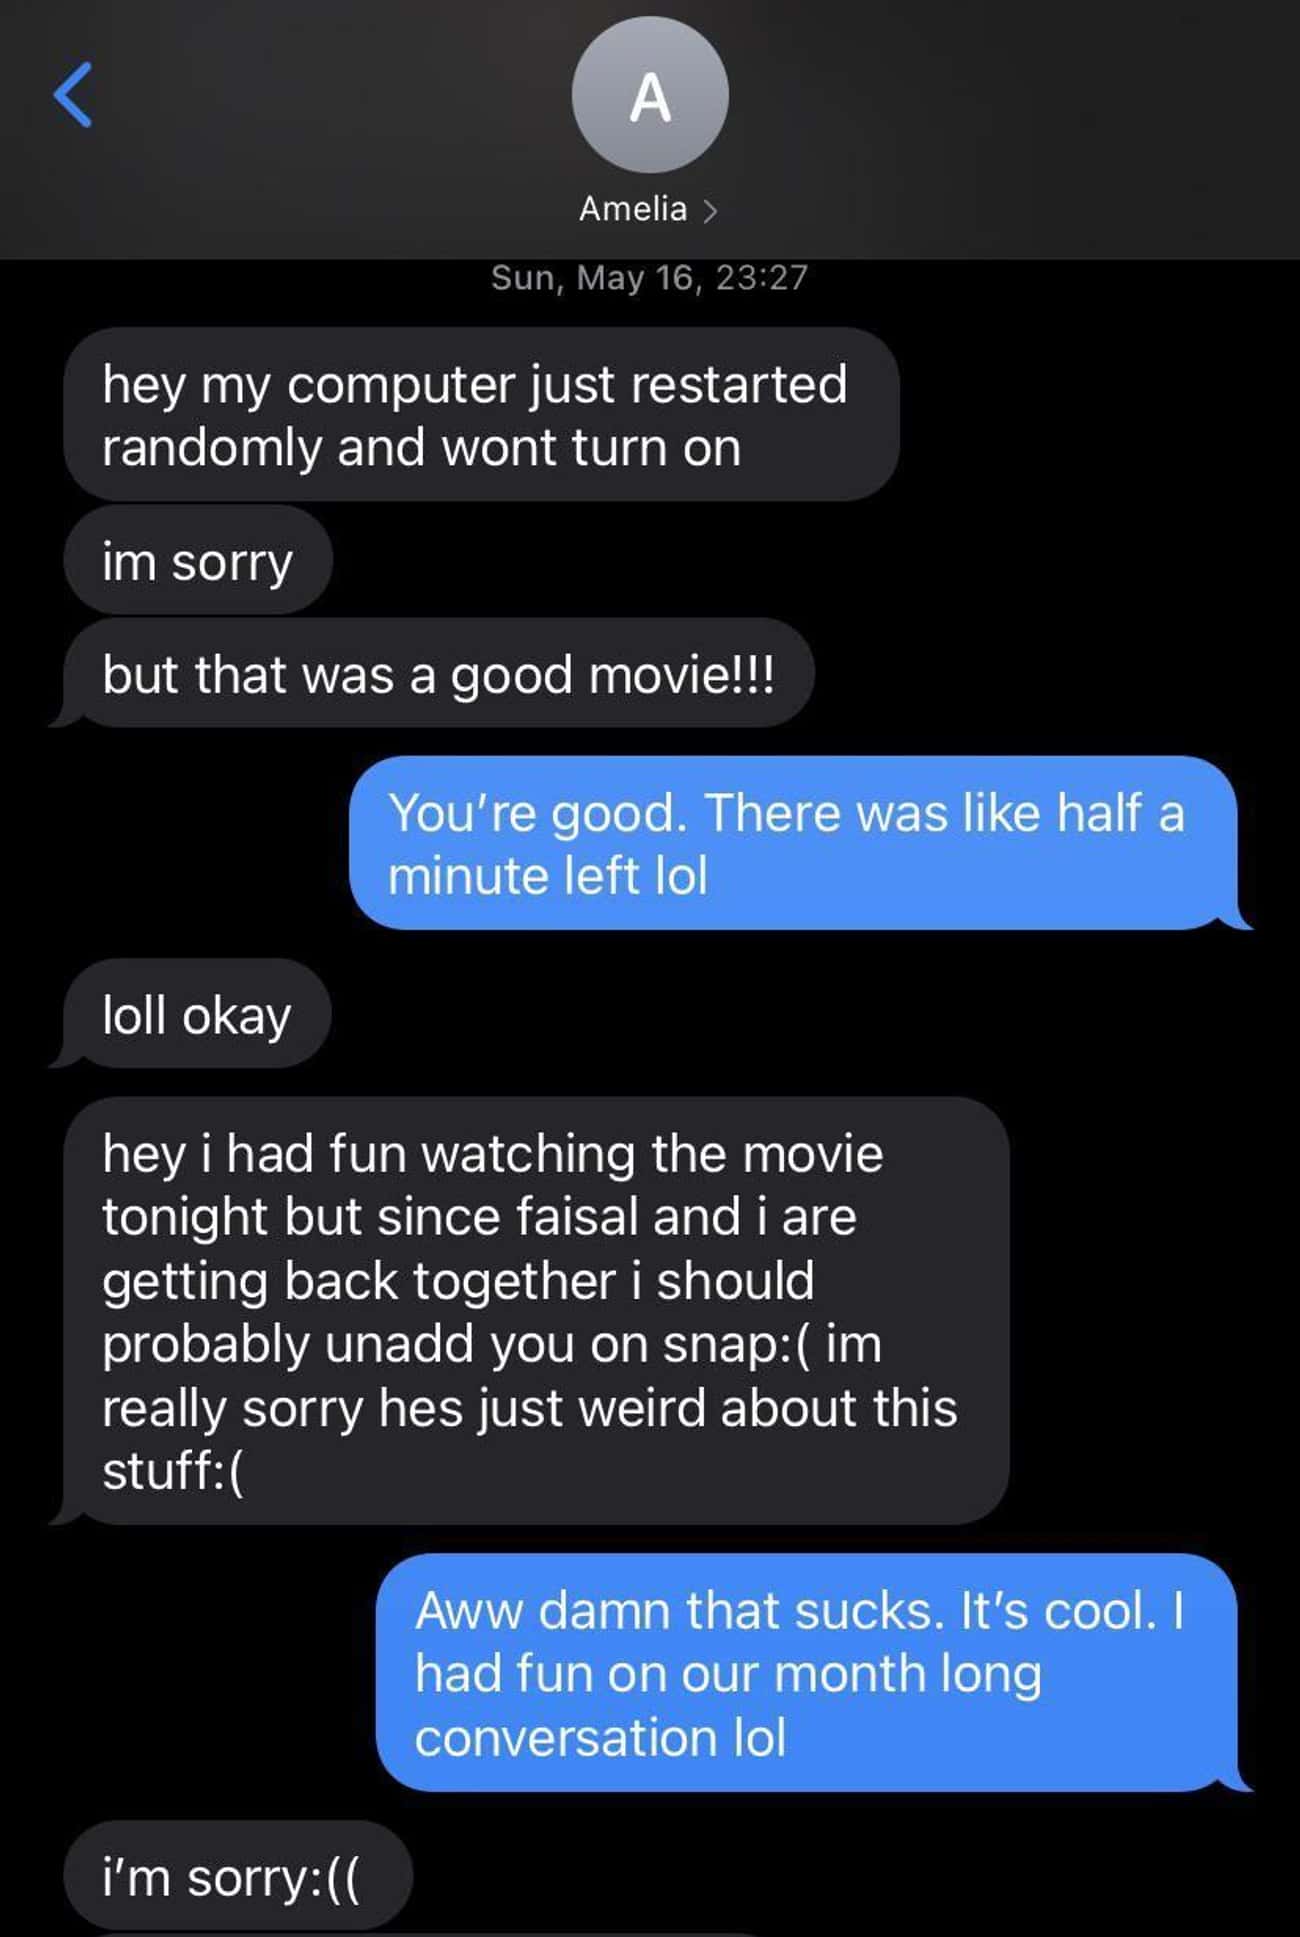 cringe posts - screenshot - A Amelia > Sun, May 16, hey my computer just restarted randomly and wont turn on im sorry but that was a good movie!!! You're good. There was half a minute left lol loll okay hey i had fun watching the movie tonight but since f